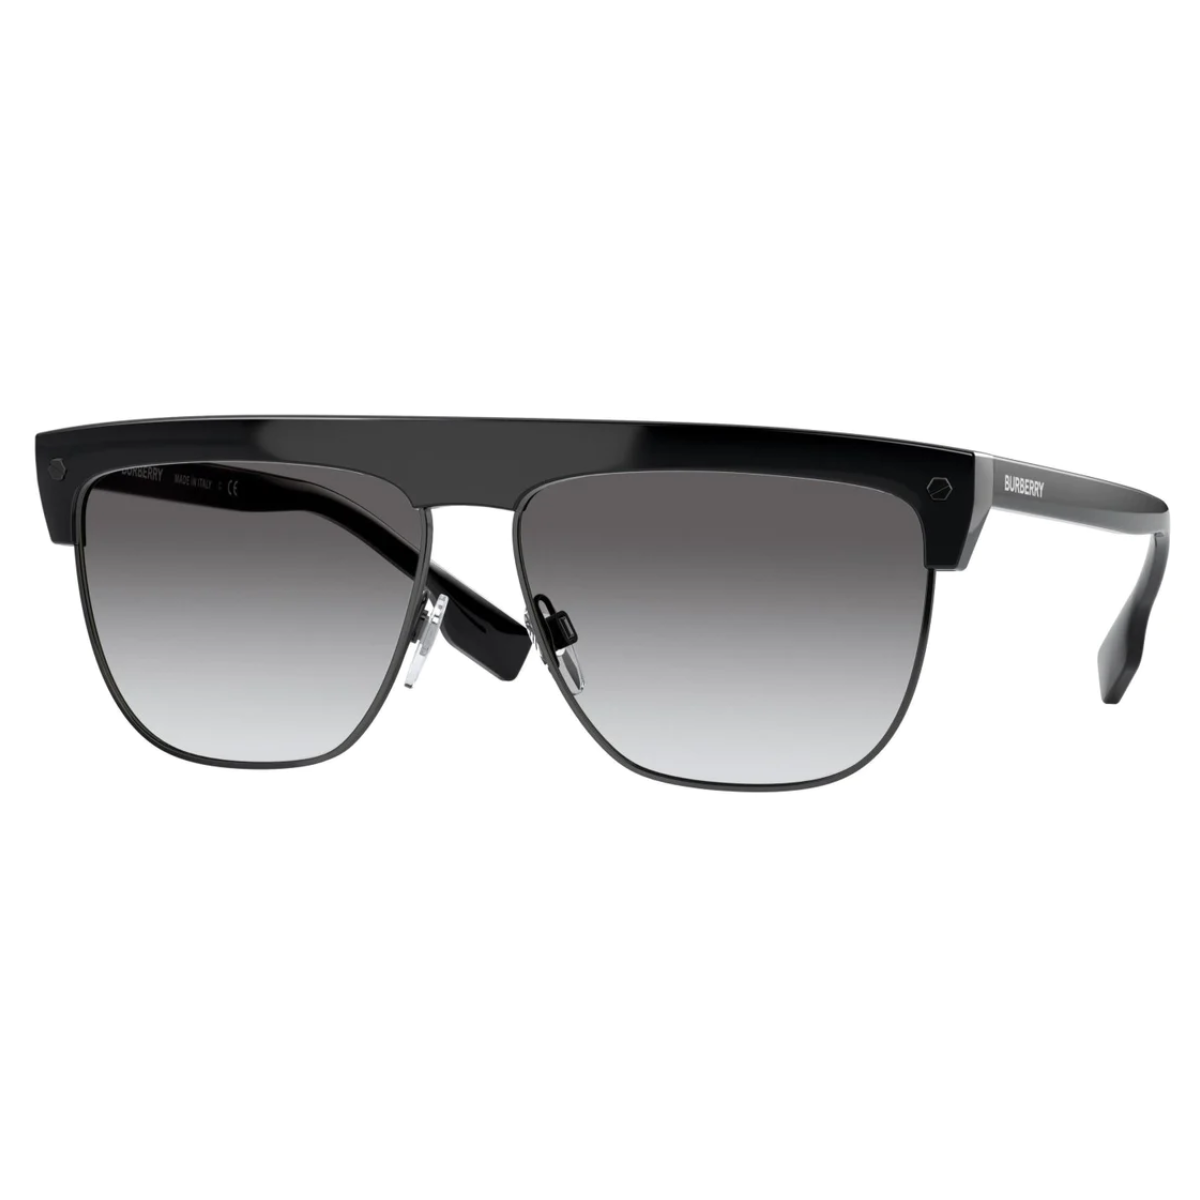 "Discover Burberry BE4325 300111 polarized sunglasses for men at Optorium: Elevate your style with fashionable and functional square-shaped shades."